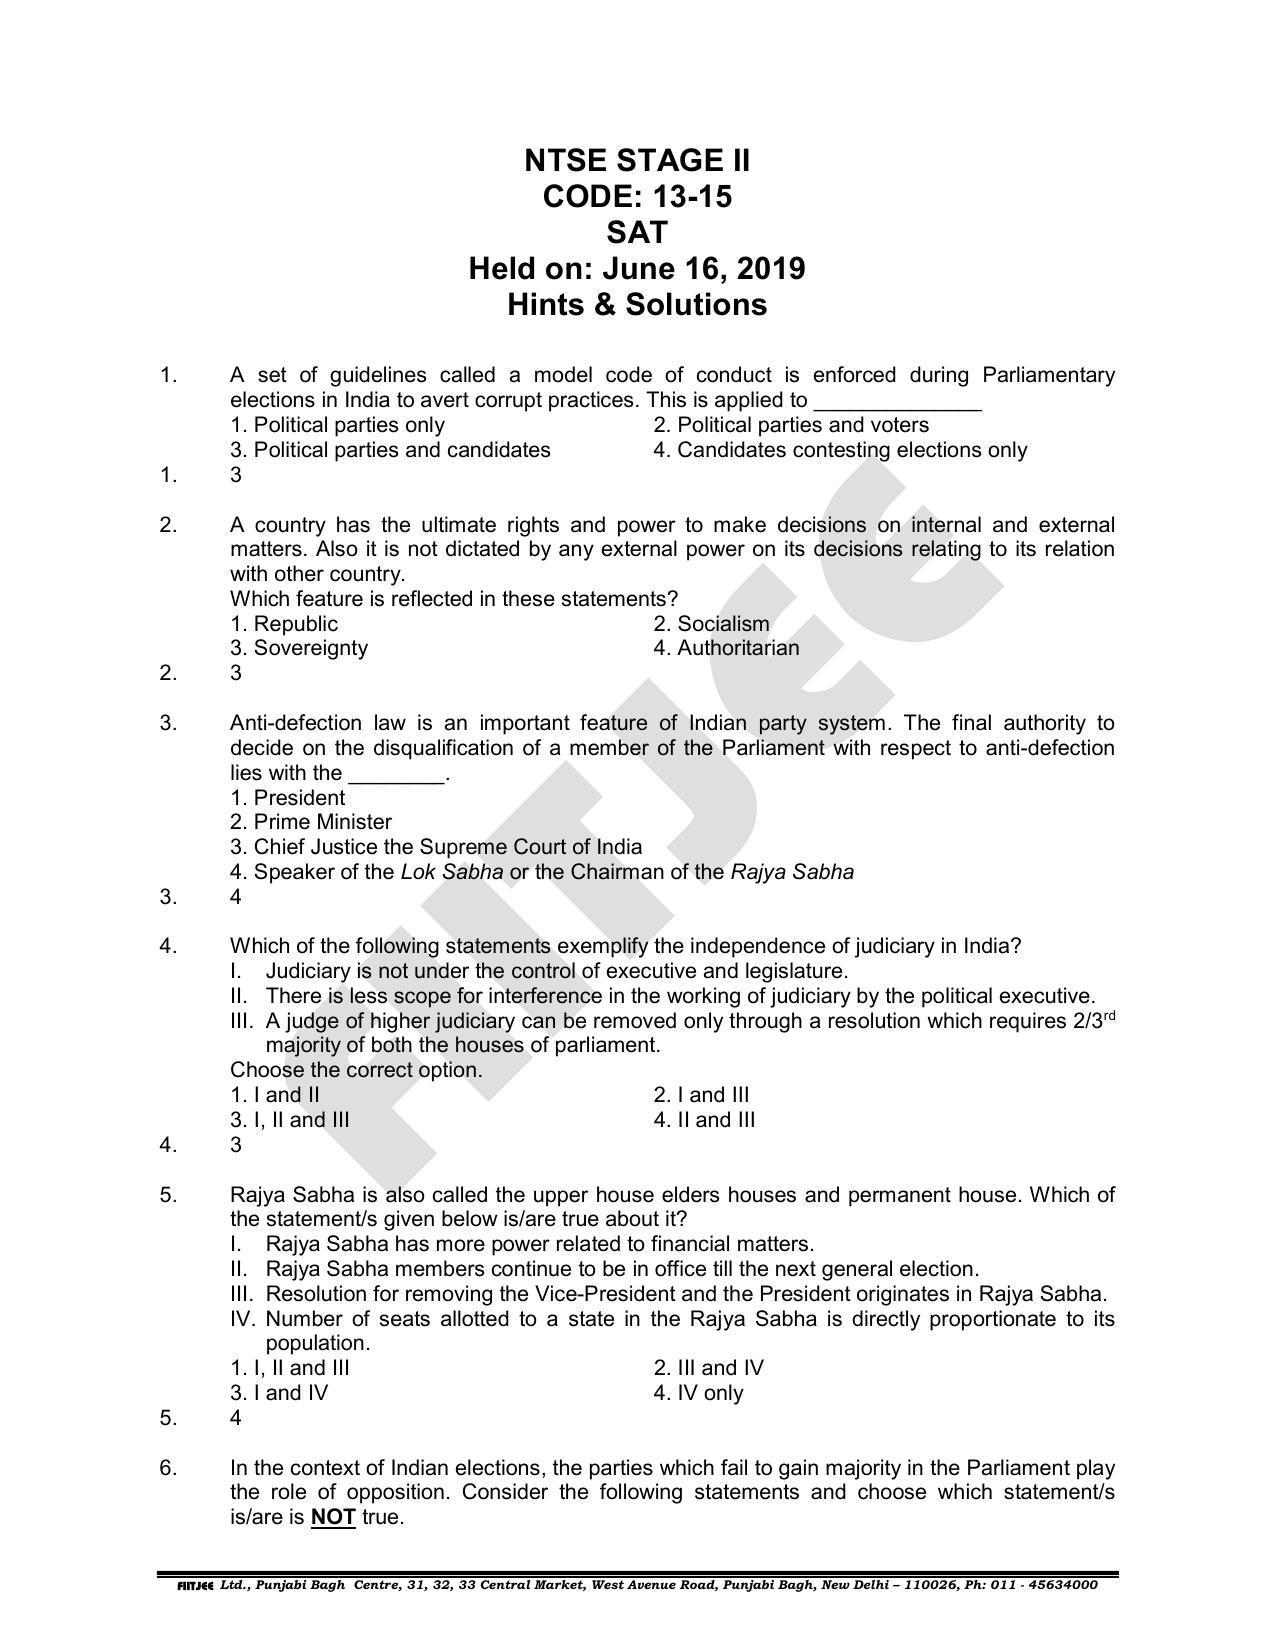 NTSE 2019 (Stage II) SAT Paper with Solution (June 16, 2019) - Page 2